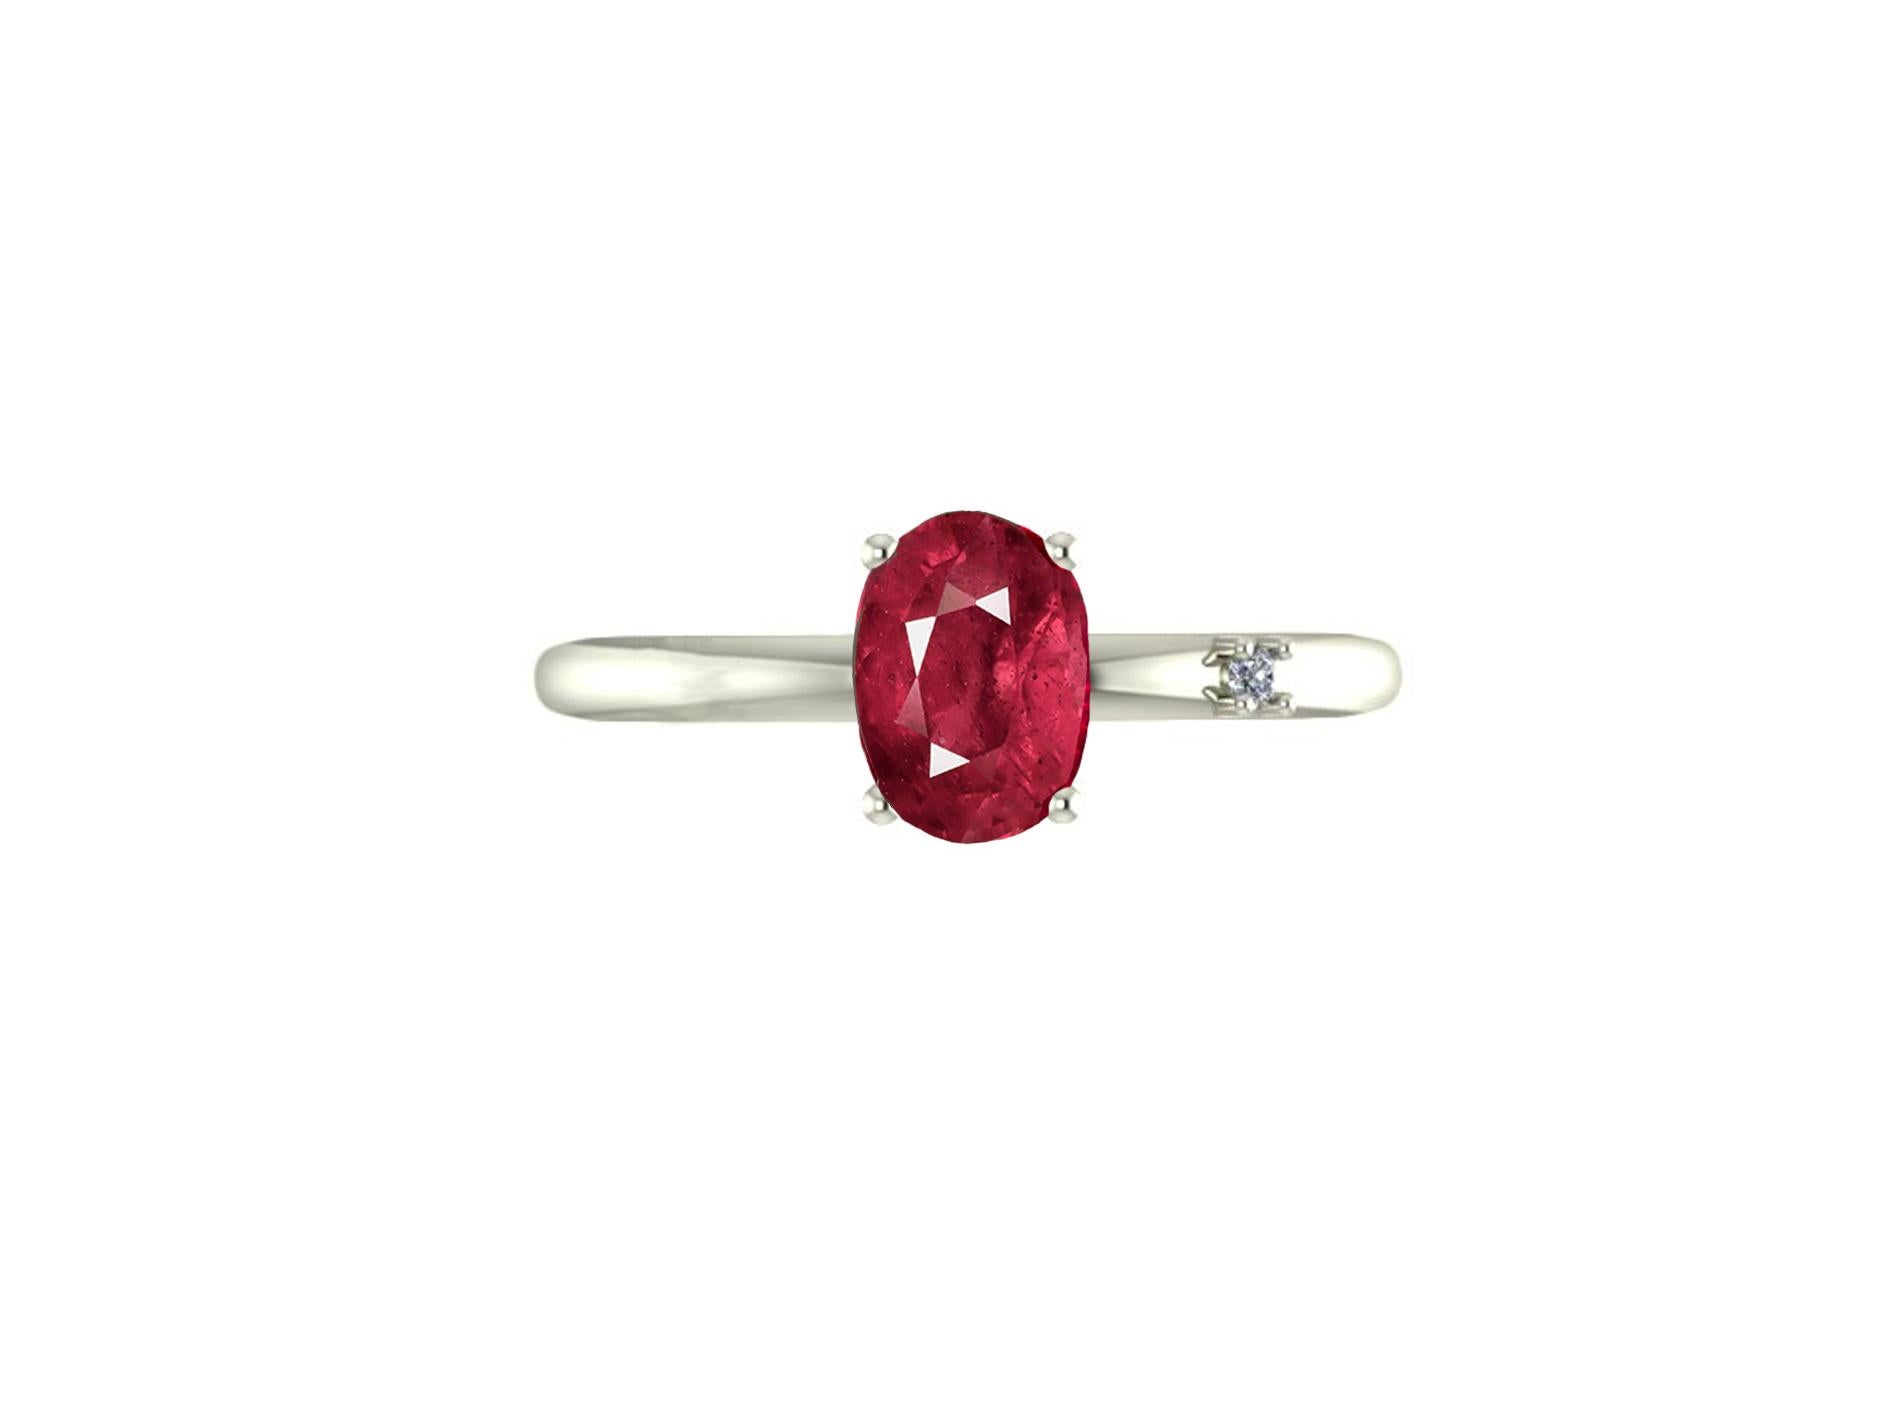 14k gold ring with ruby and diamond. Ruby 14k gold ring. Ruby stackable ring. 

Metal: 14k gold
Weight: 1.6 g. depends from size
Size: 7 us
Set with ruby 
Oval shape, approx 0.75 ct, red color.
Clarity: Transparent with inclusions.
Surrounding stone